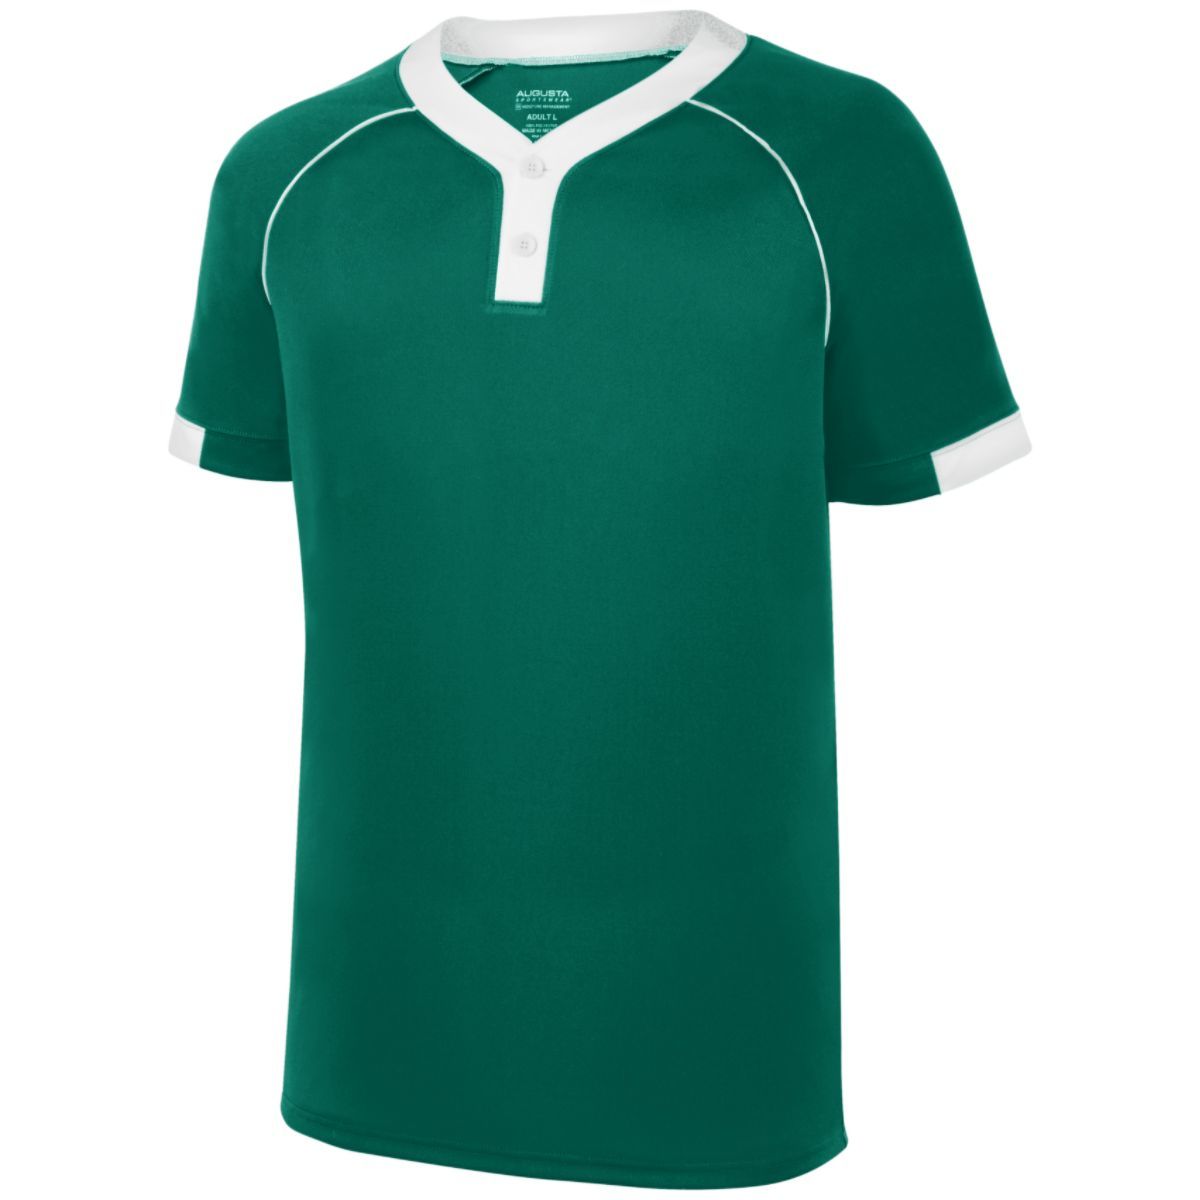 Augusta Sportswear Stanza Jersey in Dark Green/White  -Part of the Adult, Adult-Jersey, Augusta-Products, Baseball, Shirts, All-Sports, All-Sports-1 product lines at KanaleyCreations.com